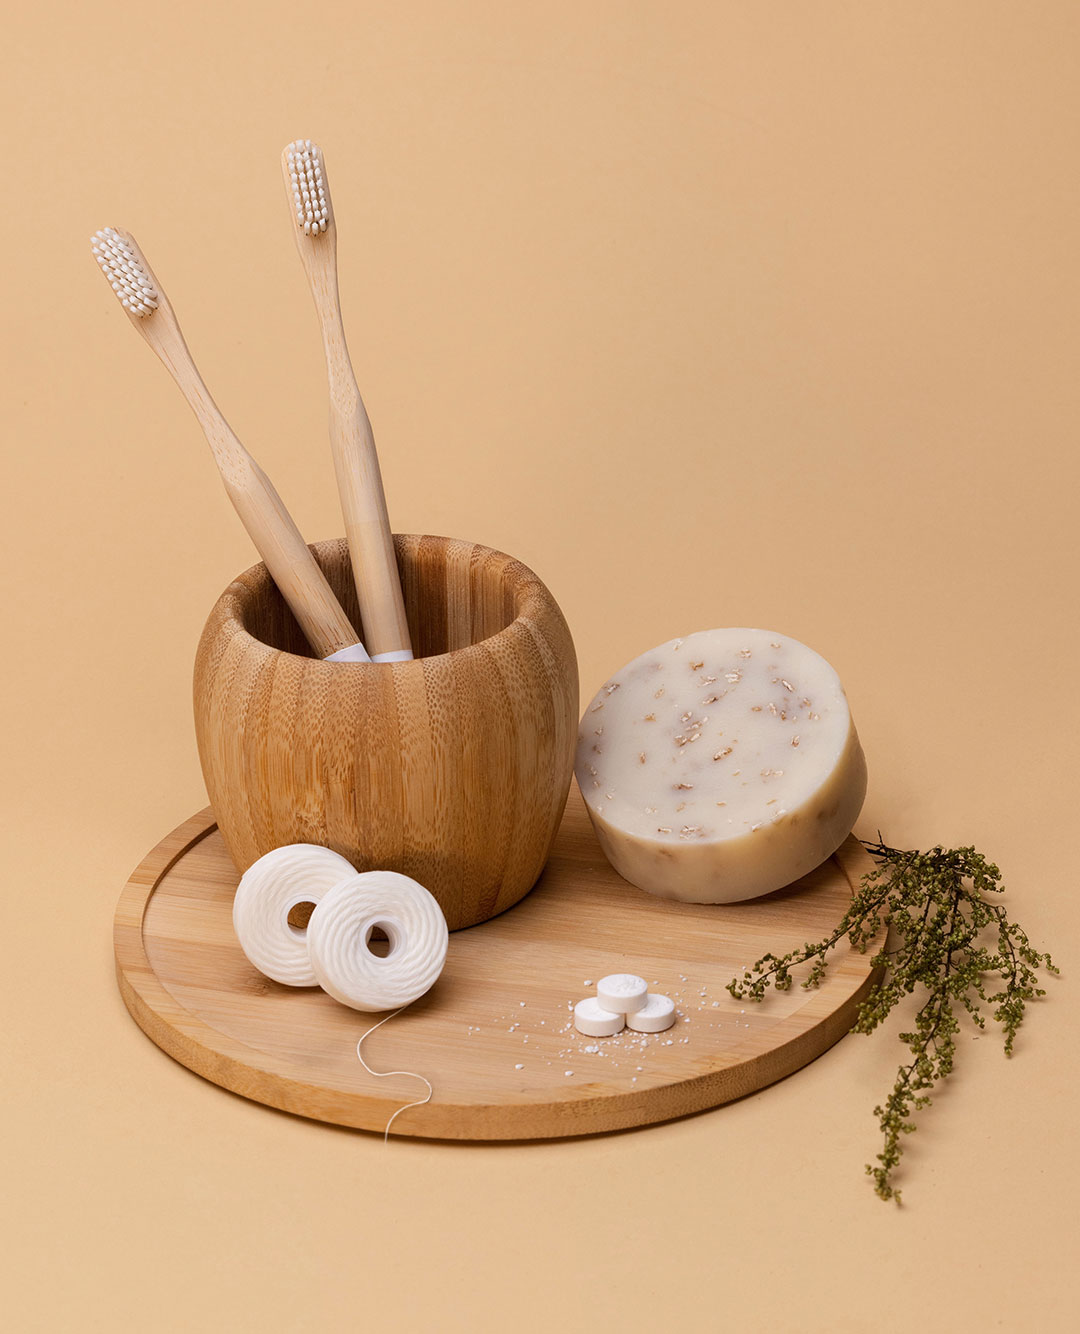 Bamboo toothbrush kit along side floss and soap that are nature friendly